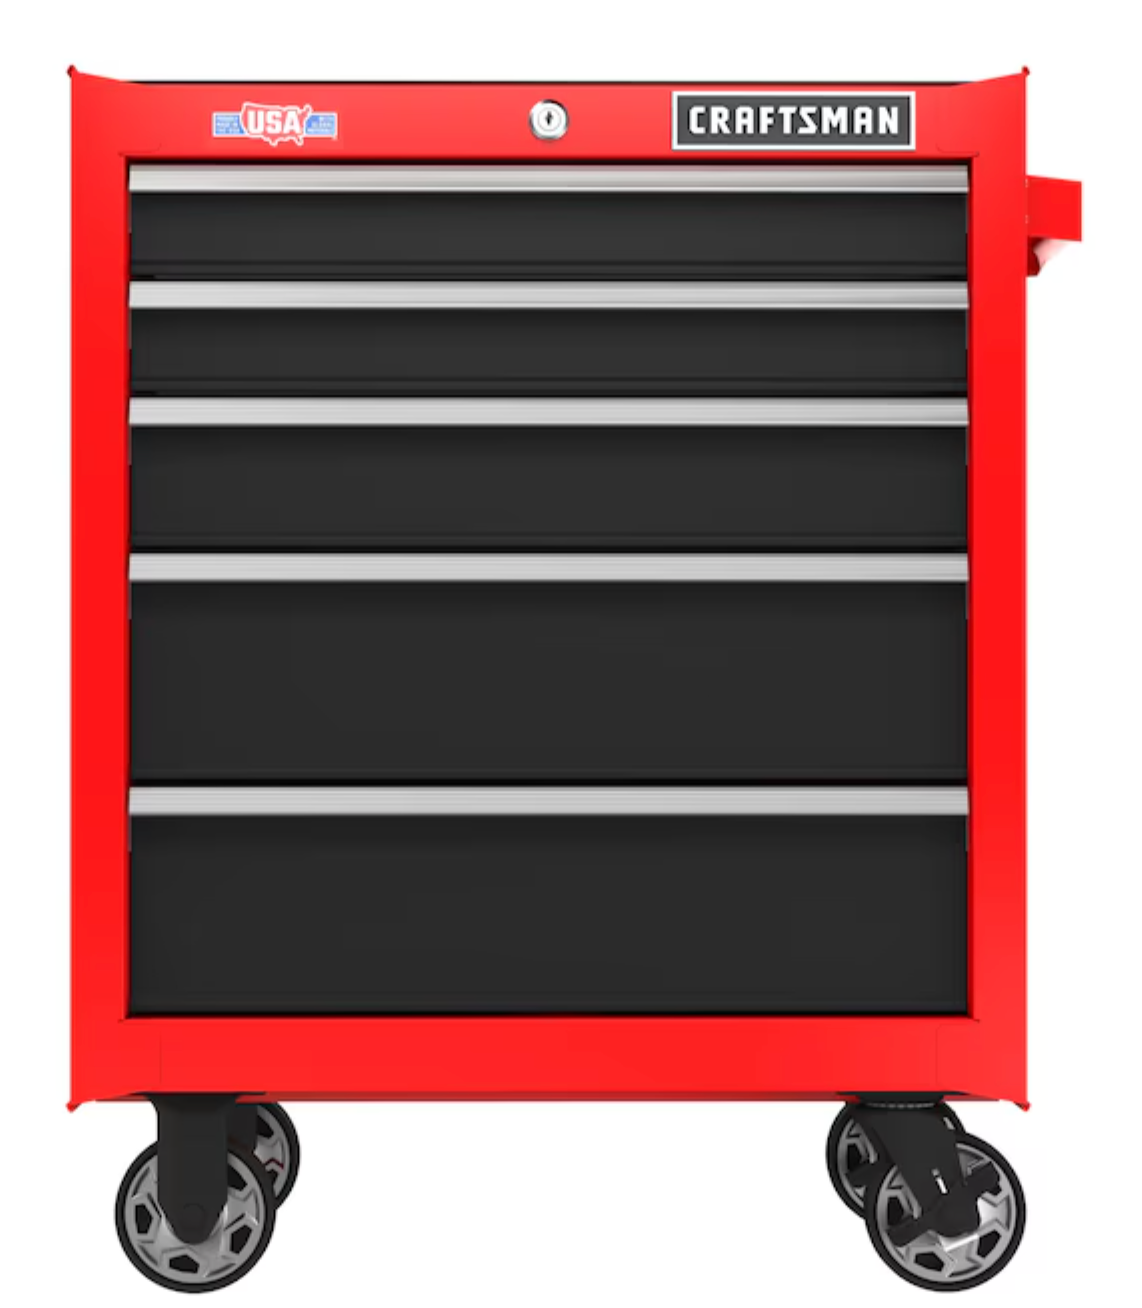 RED CRAFTSMAN 2000 Series 26.5-in W x 34-in H 5-Drawer Steel Rolling Tool Cabinet